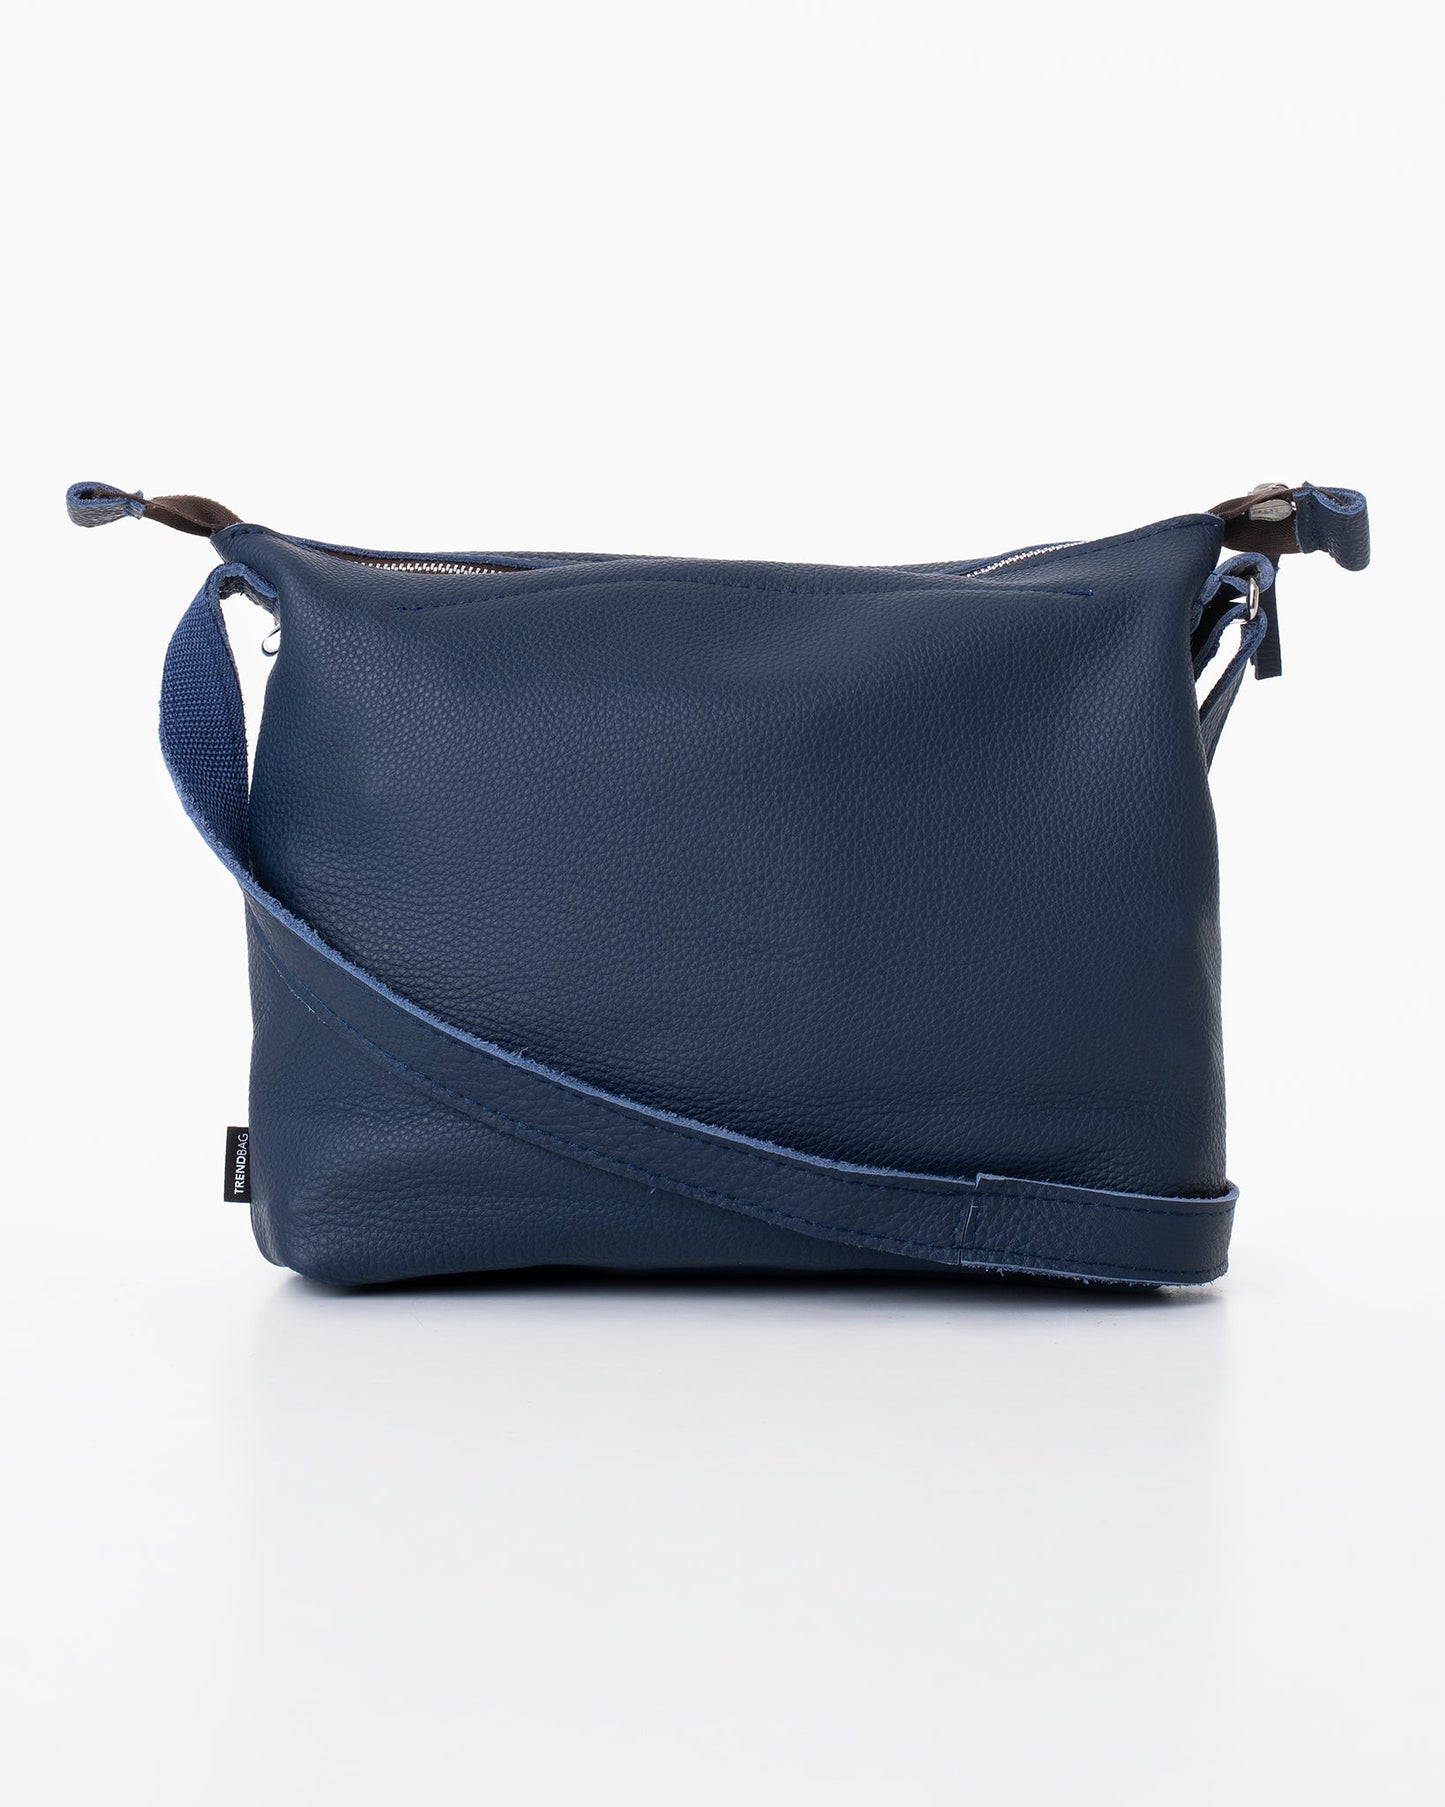 Handmade Anet L shoulder bag crafted from blue leather, utilizing furniture industry leftovers for eco-friendly, durable design. Made in Estonia.